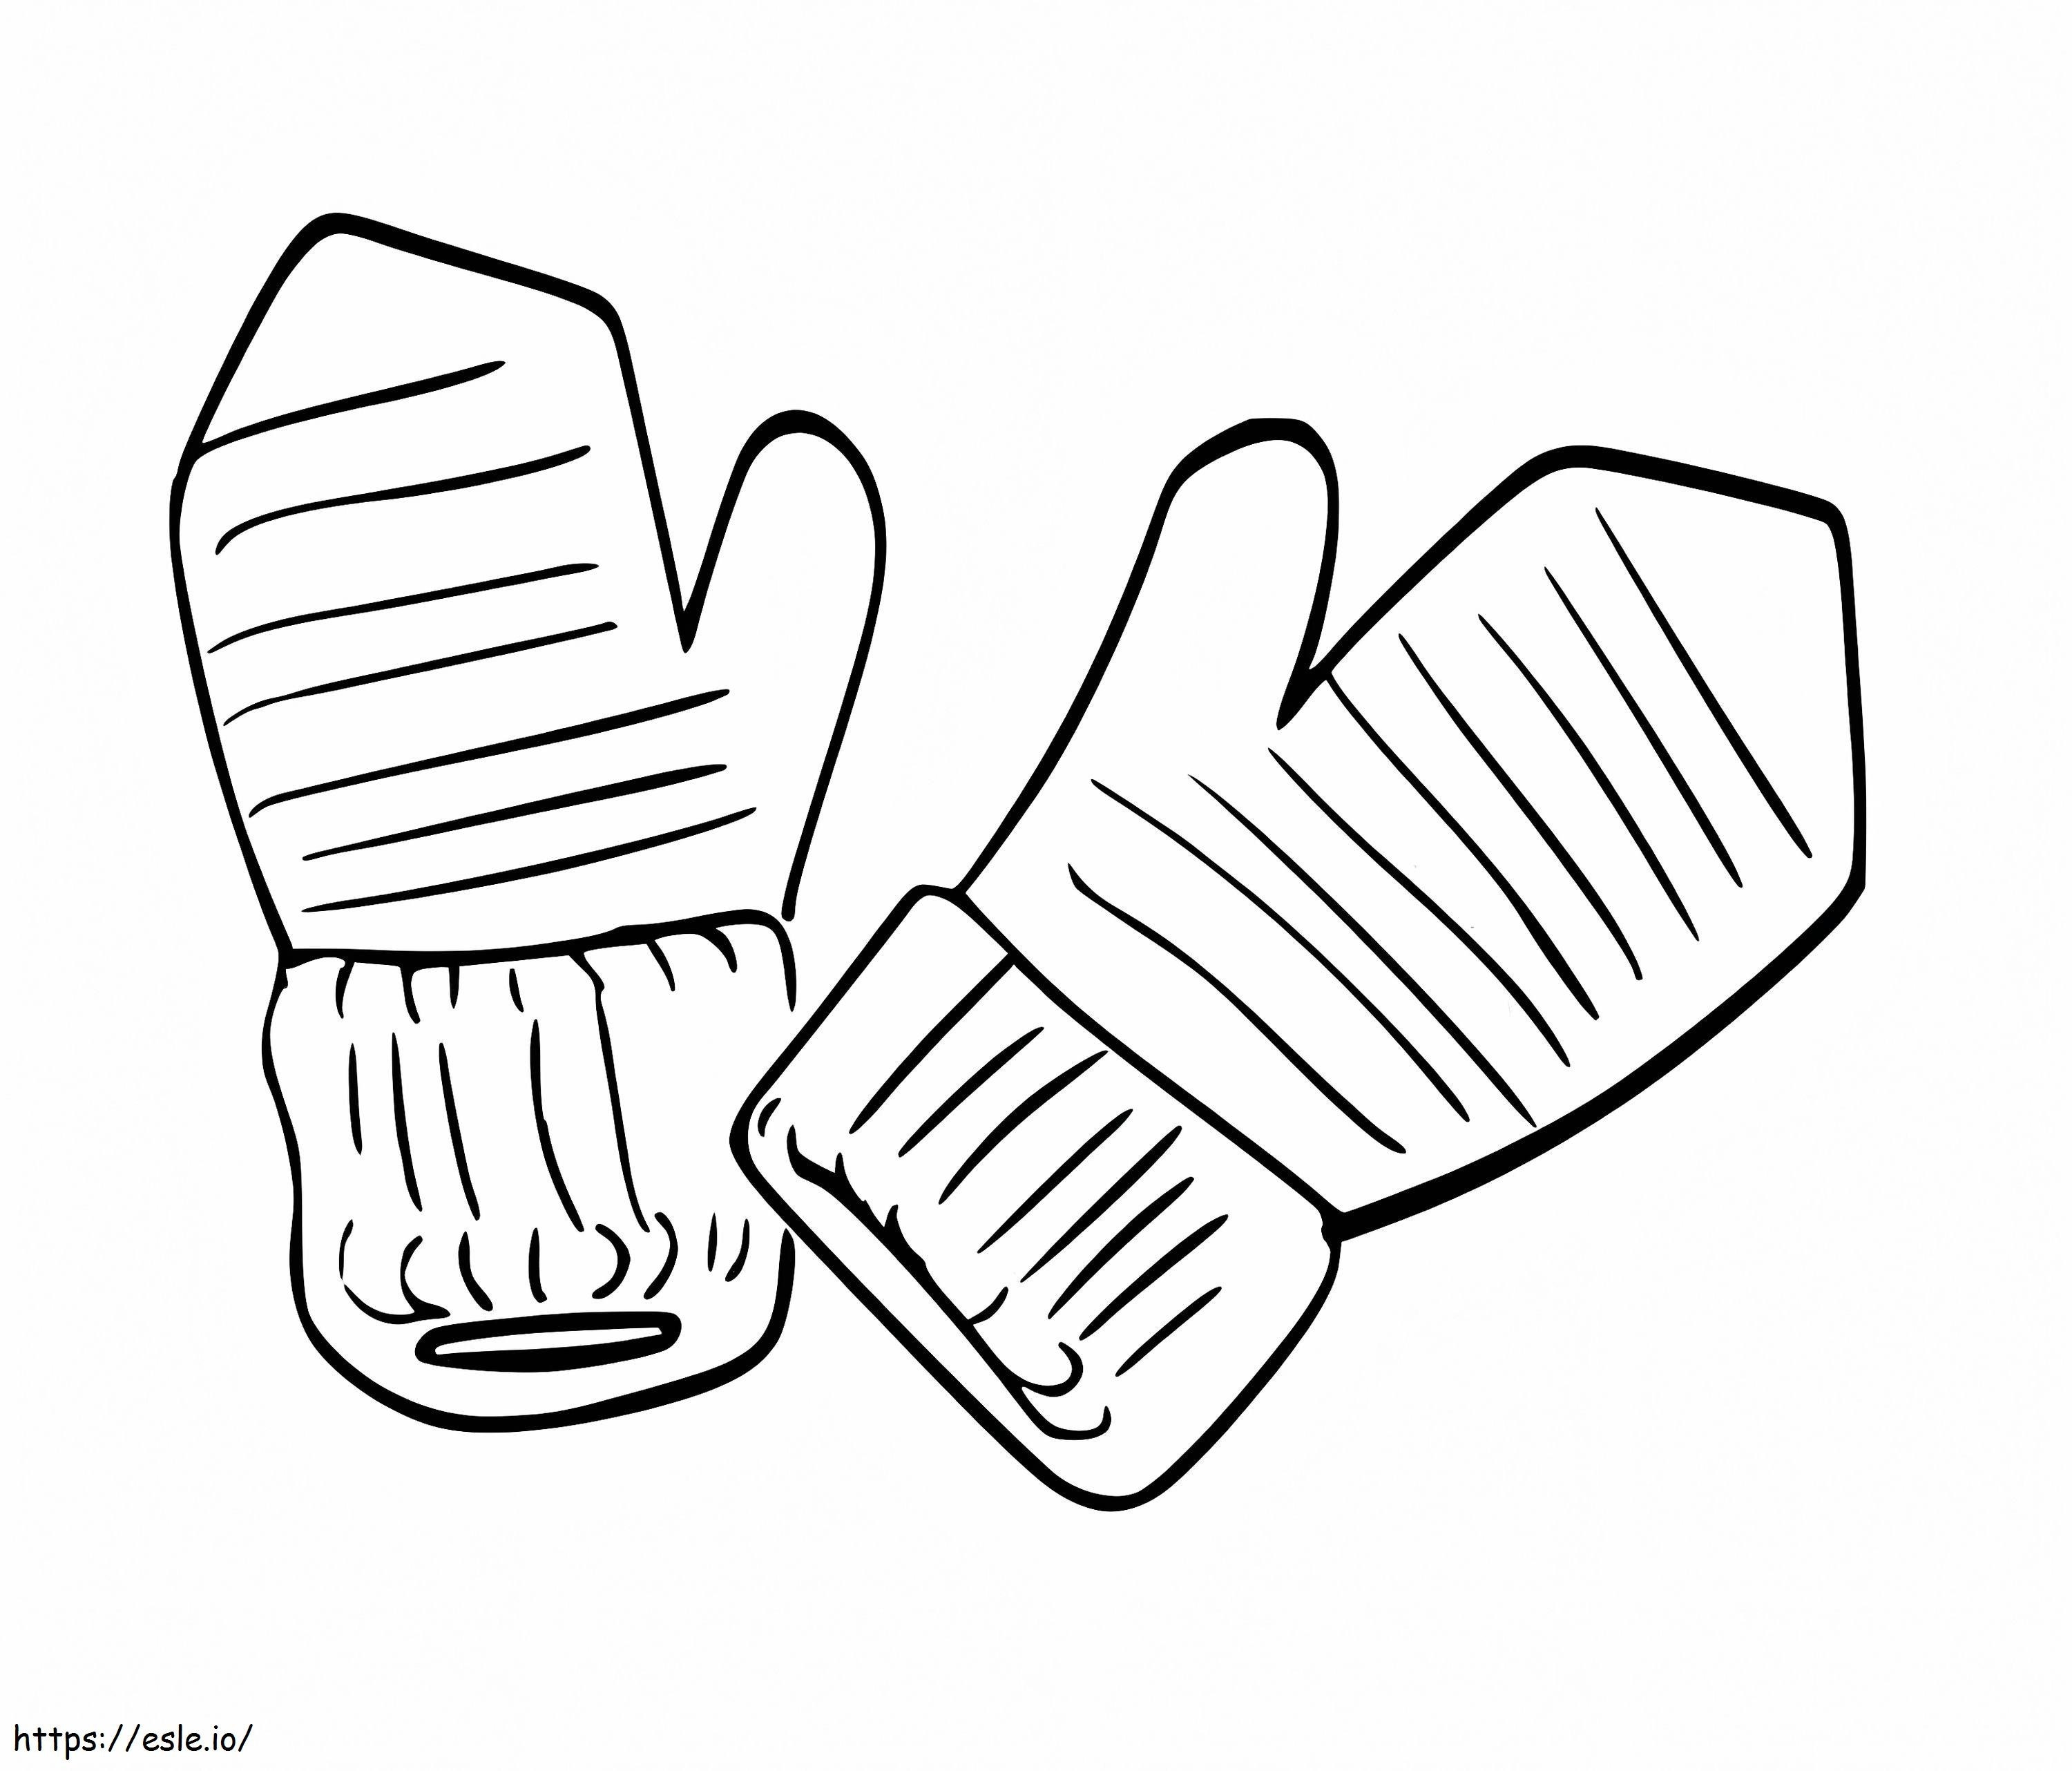 Mittens Free coloring page